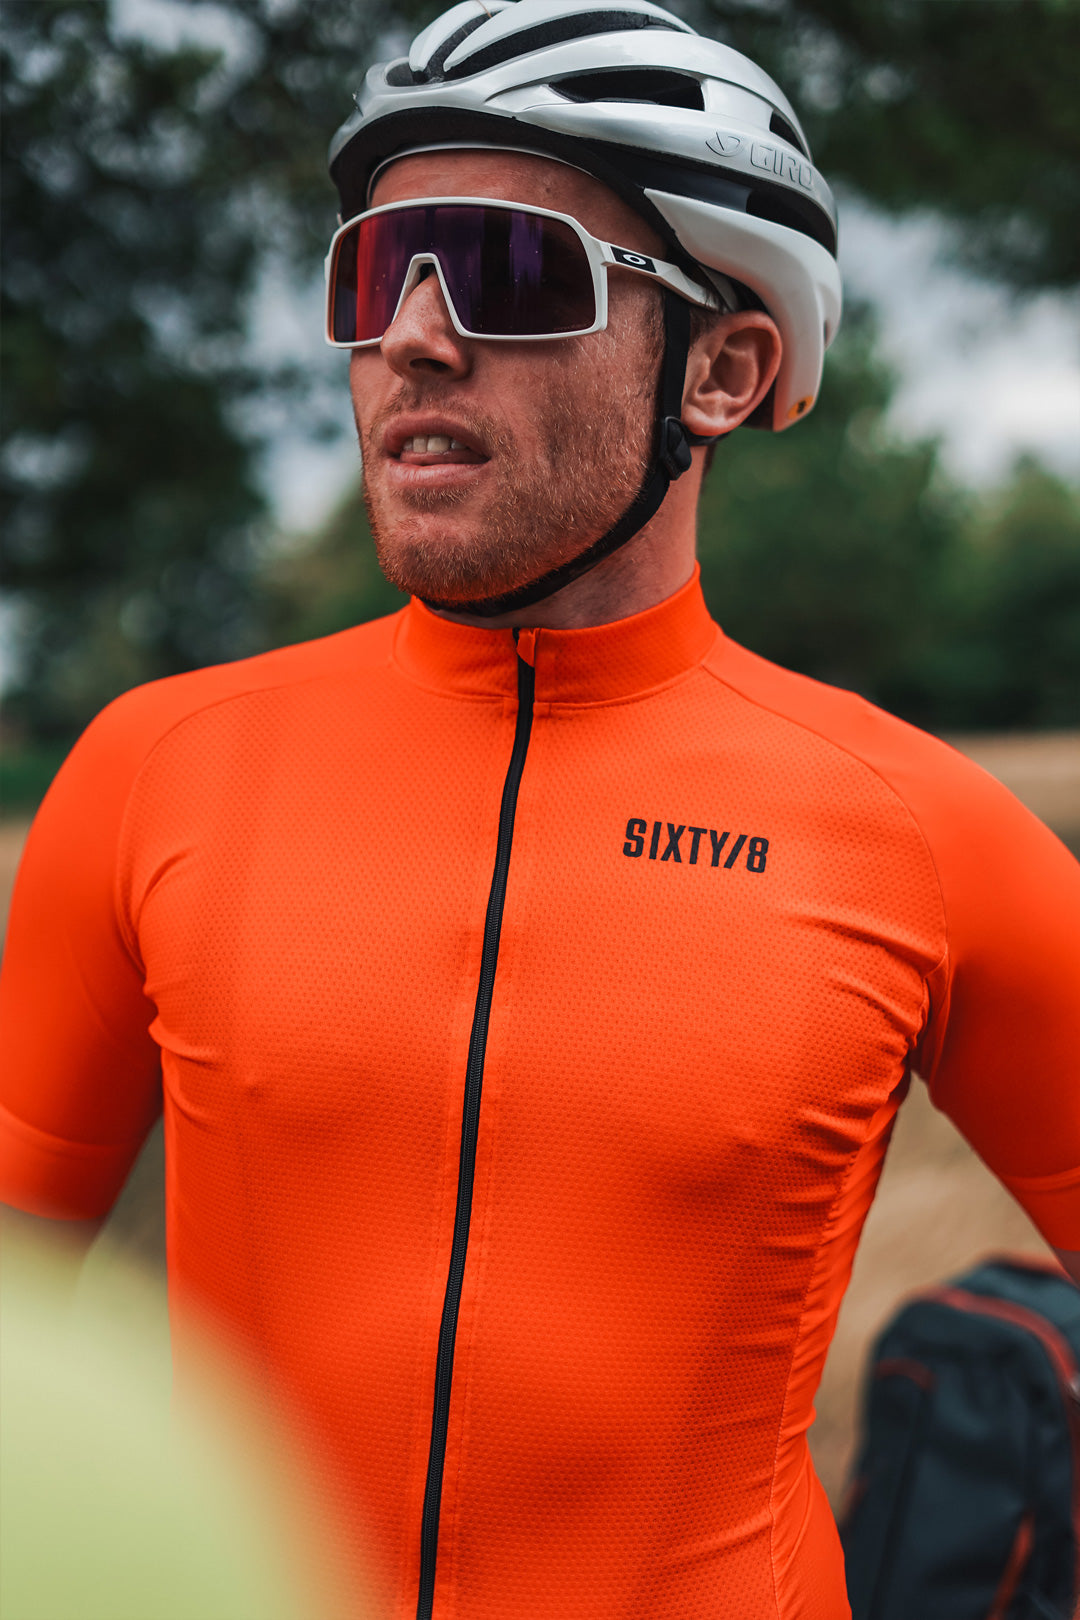 Sixty/8 MENS Short Sleeved Cycling Jersey - Orange